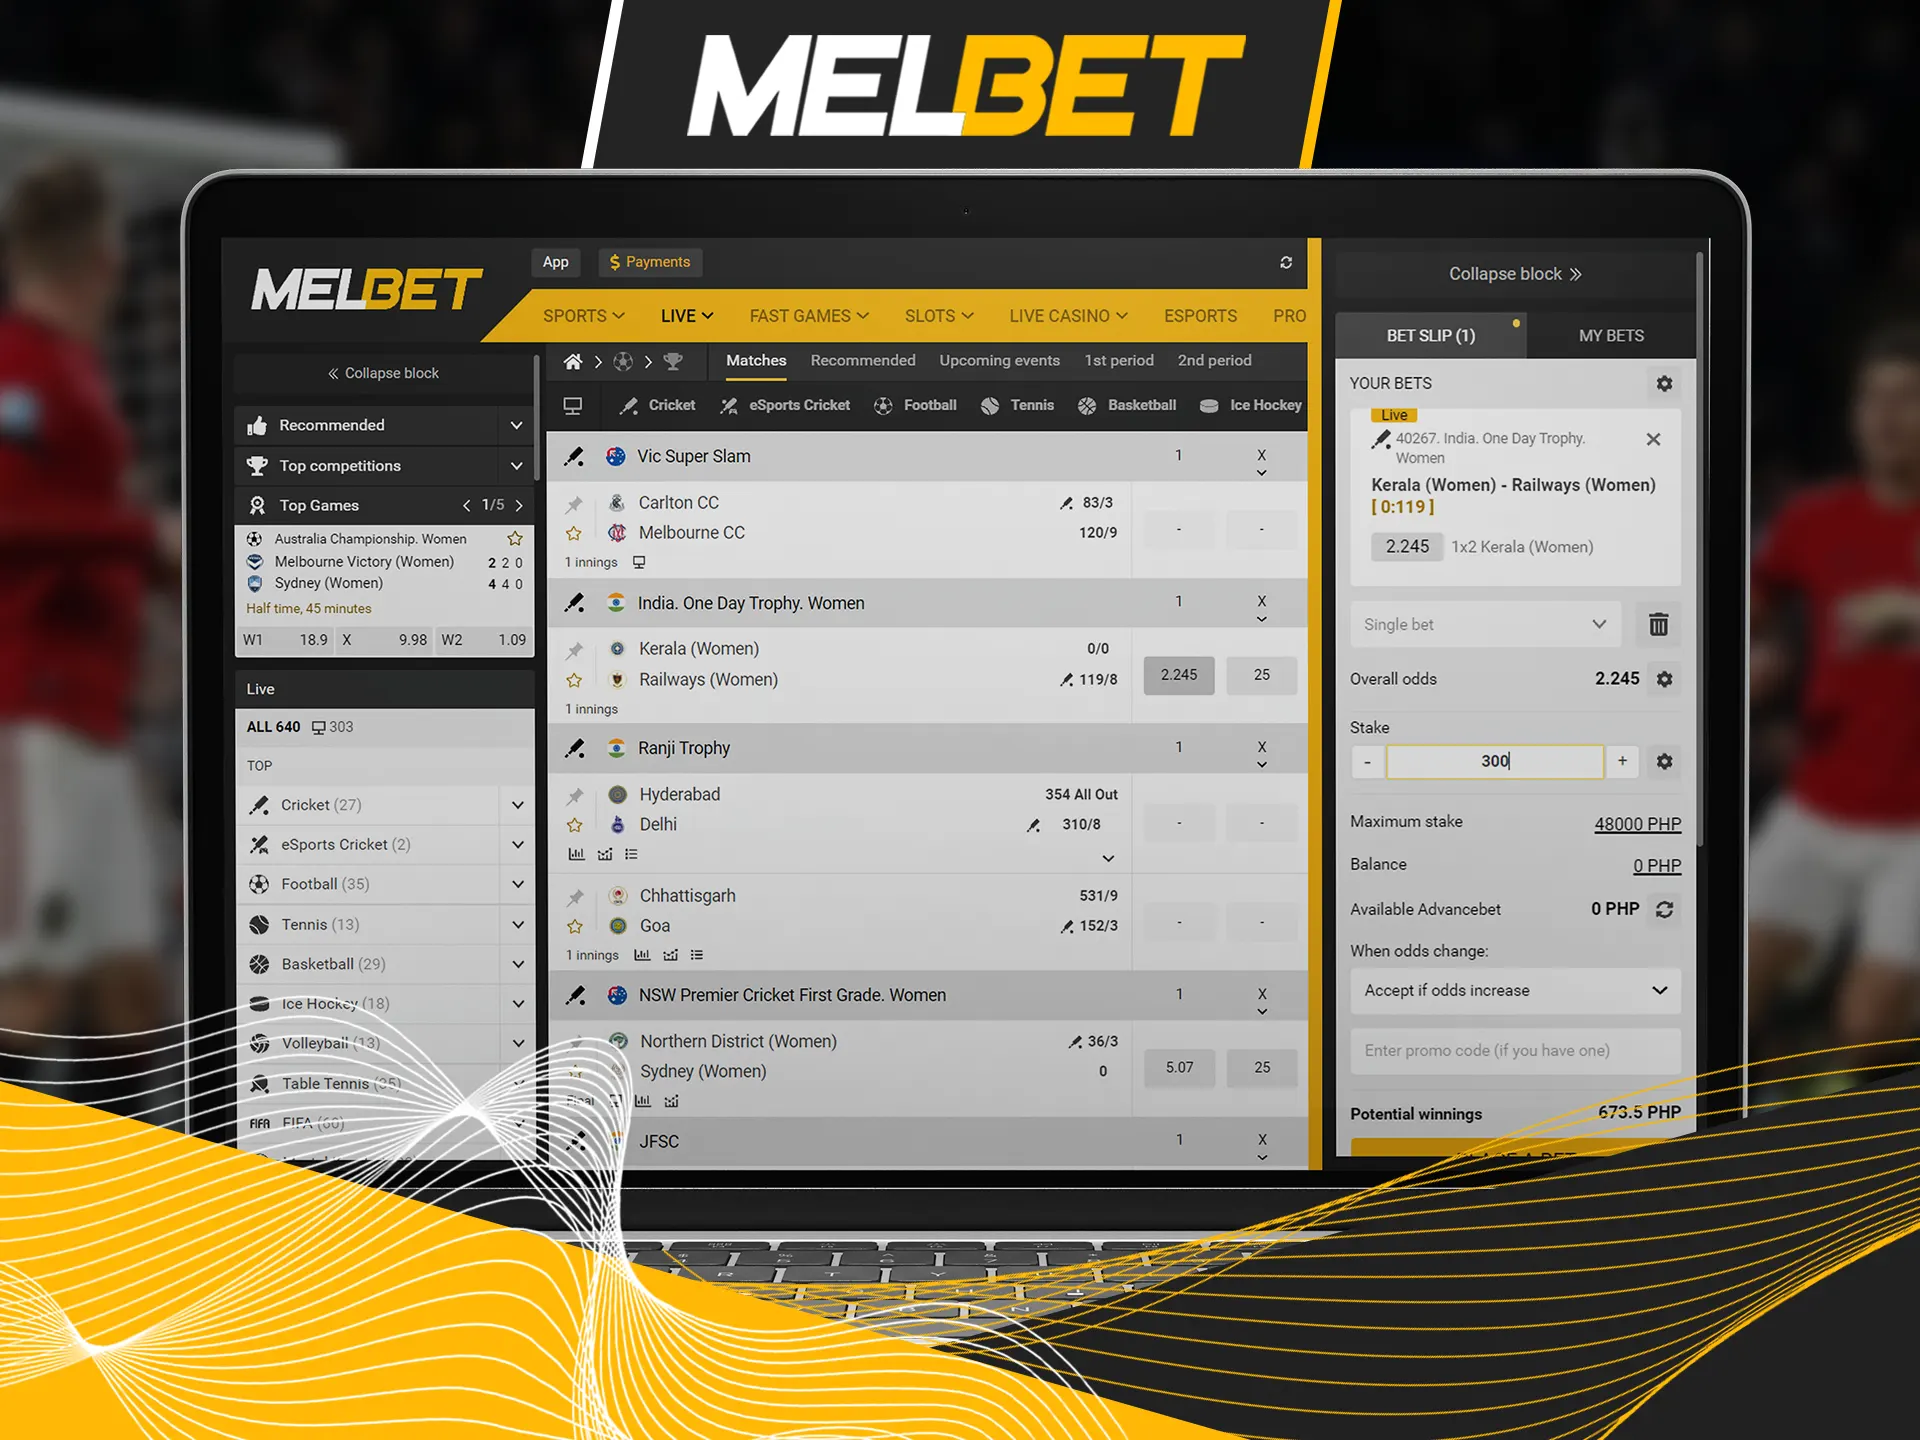 Making bets at Melbet website is easy.